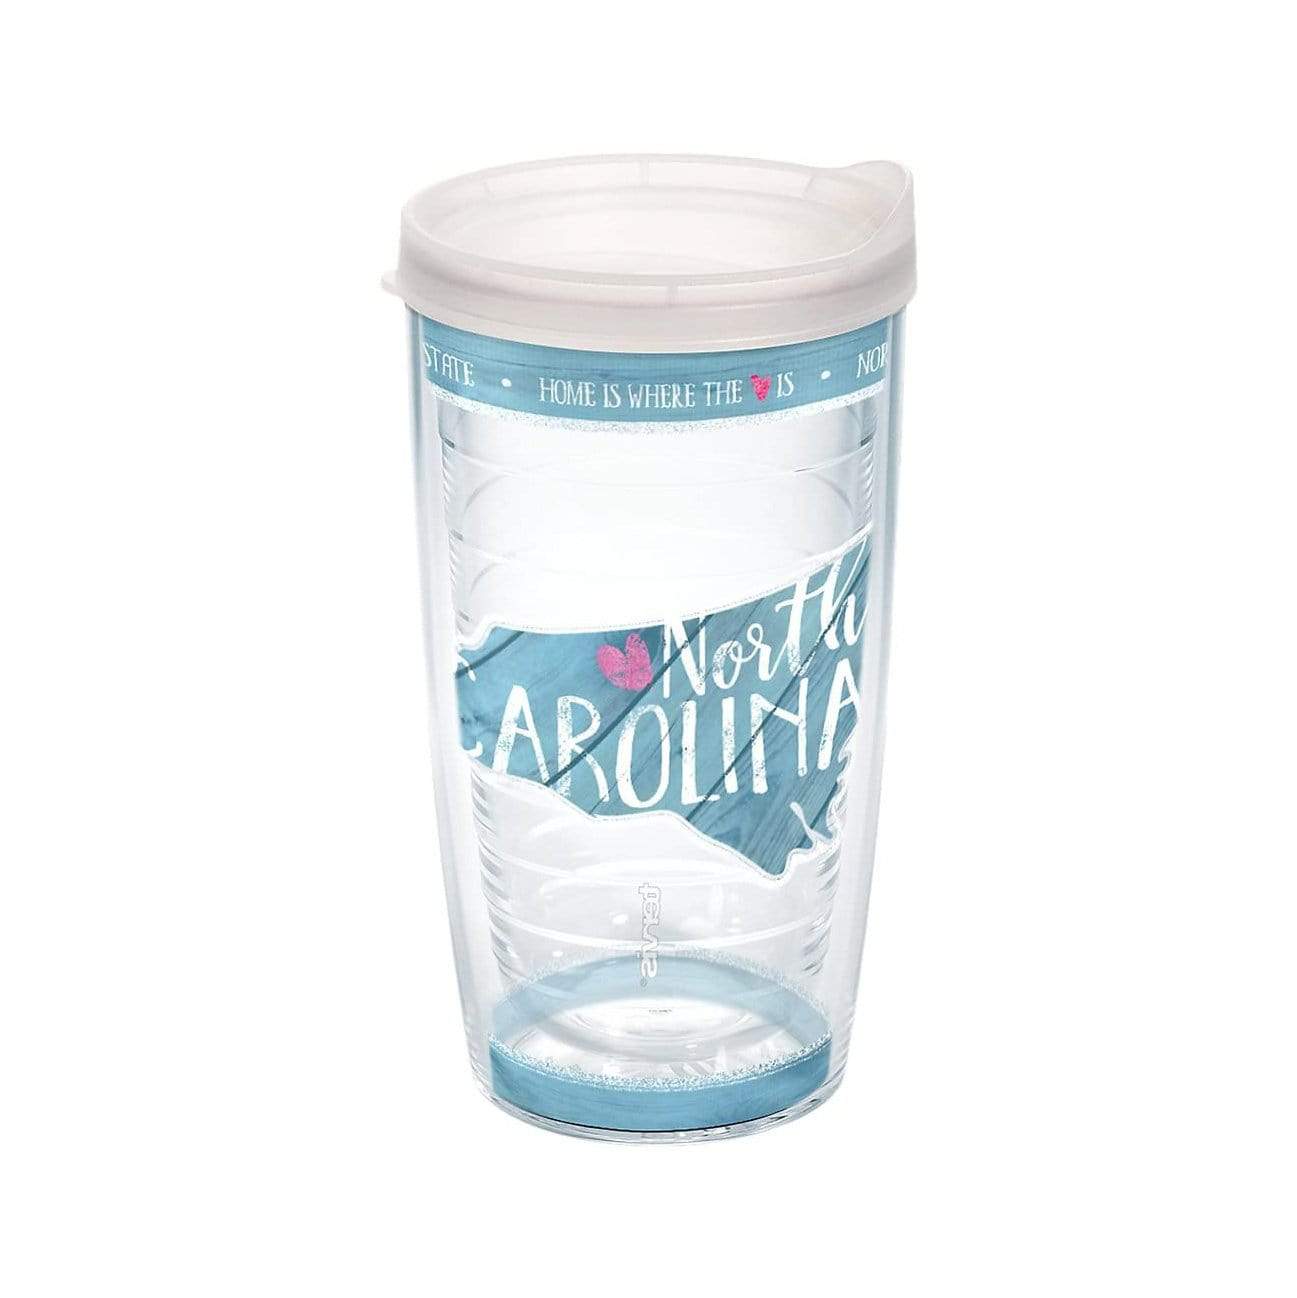 https://cdn.shopify.com/s/files/1/0472/3146/7683/products/tervis-tumbler-16-oz-north-carolina-state-outline-wrap-tumbler-with-lid-30638248951971_1600x.jpg?v=1623681781